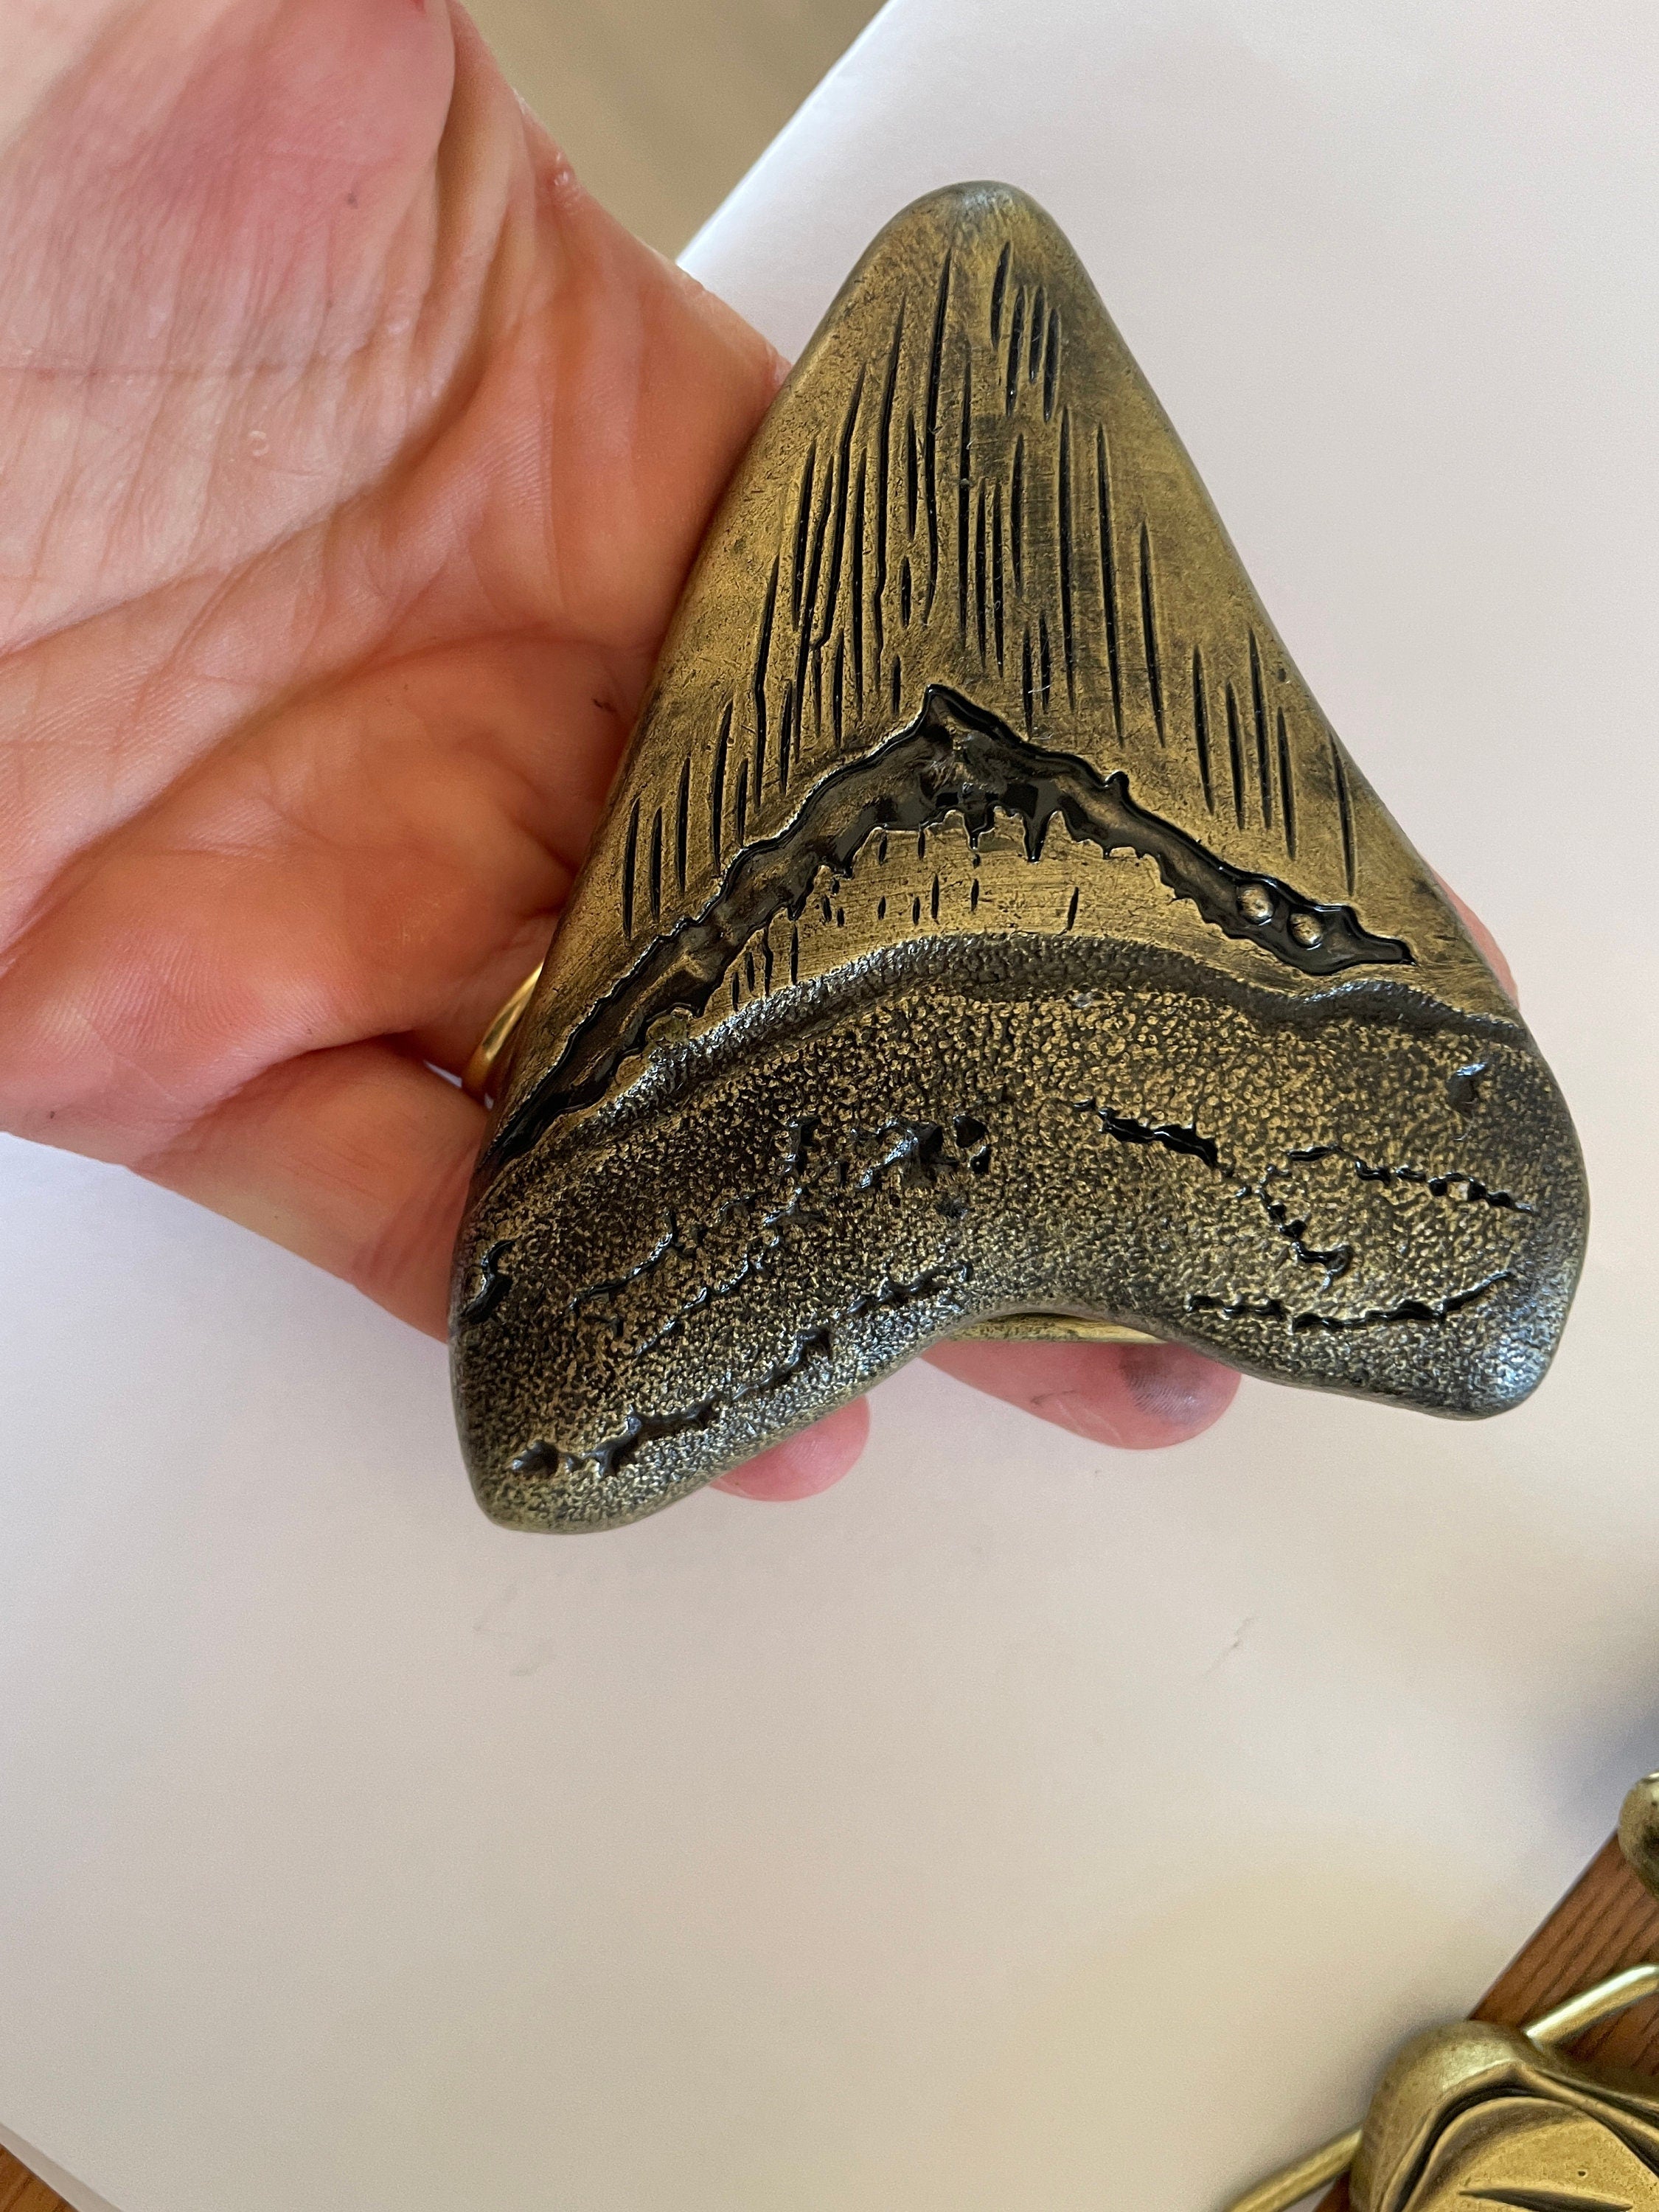 Large Megalodon Sharks Tooth Belt buckle - Fossil Great White Tiger Fishing Fisherman Cage Diving Dinosaur Scary Ocean Week Funny Gift Idea